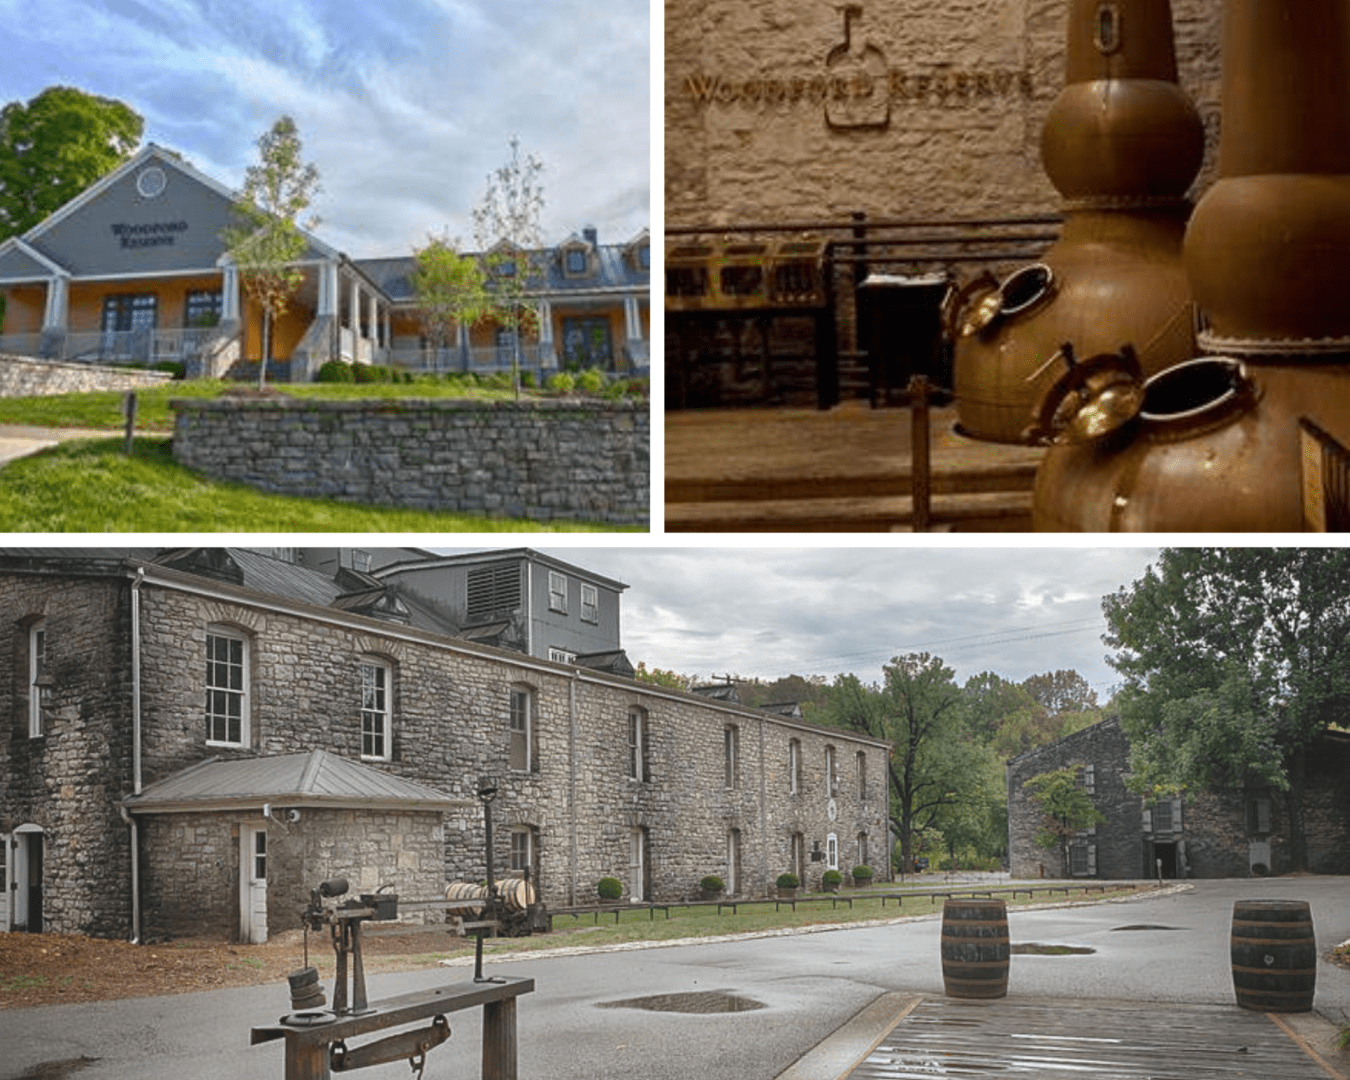 Collage of three images featuring different distilleries: a modern building, aged stone structures, and close-up of whiskey barrels and bottles.